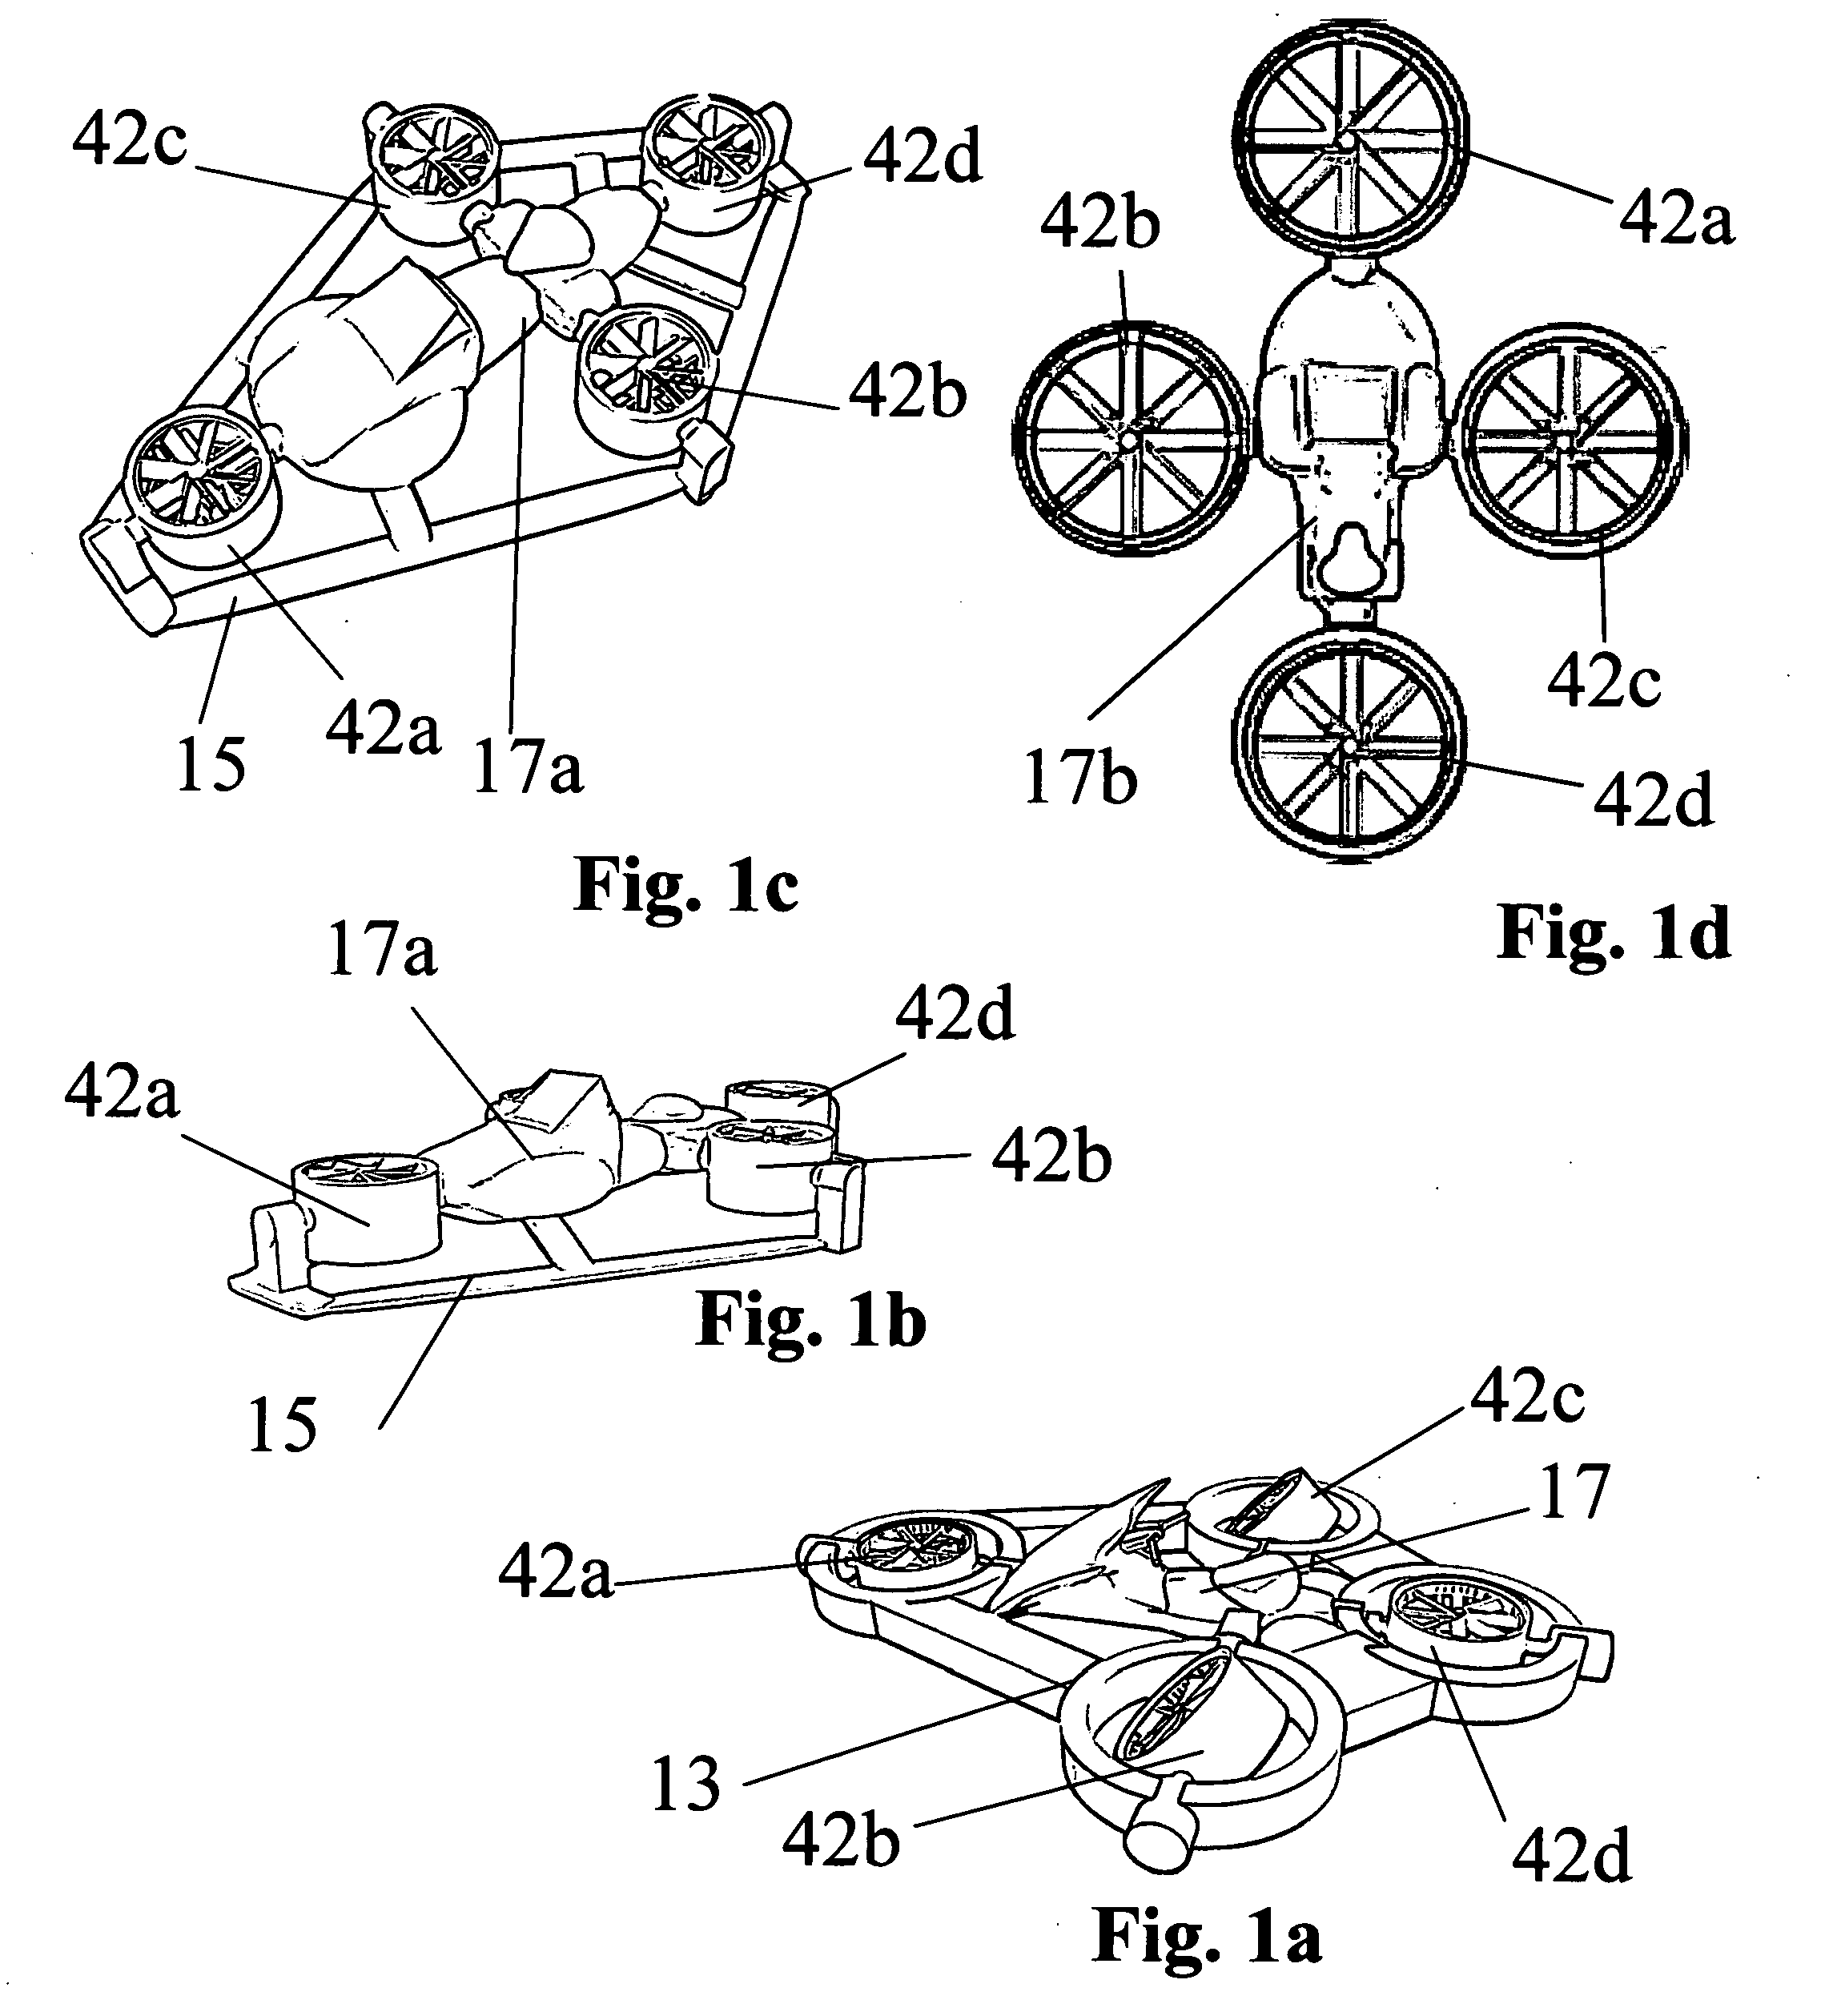 Ducted fan vertical take-off and landing vehicle